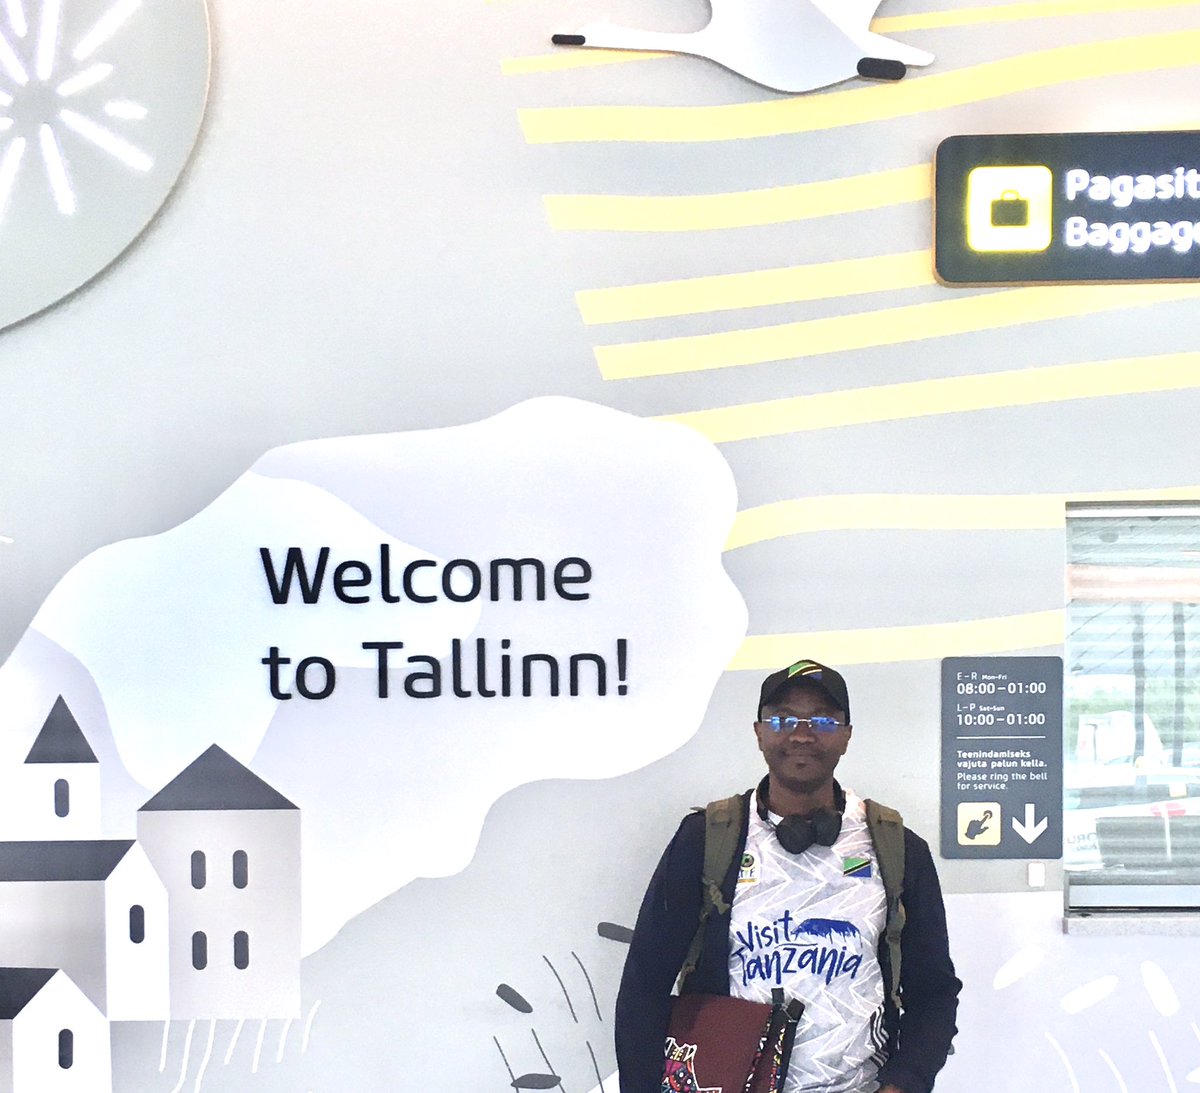 🌟✈️ Today ! Discovering the Enchanting Charms of Tallinn, Estonia 🇪🇪 Ahead of the OGP Summit! 🌆

Looking forward to explore and learn more! 
#OGPSummit
#Tallinn
#Estonia